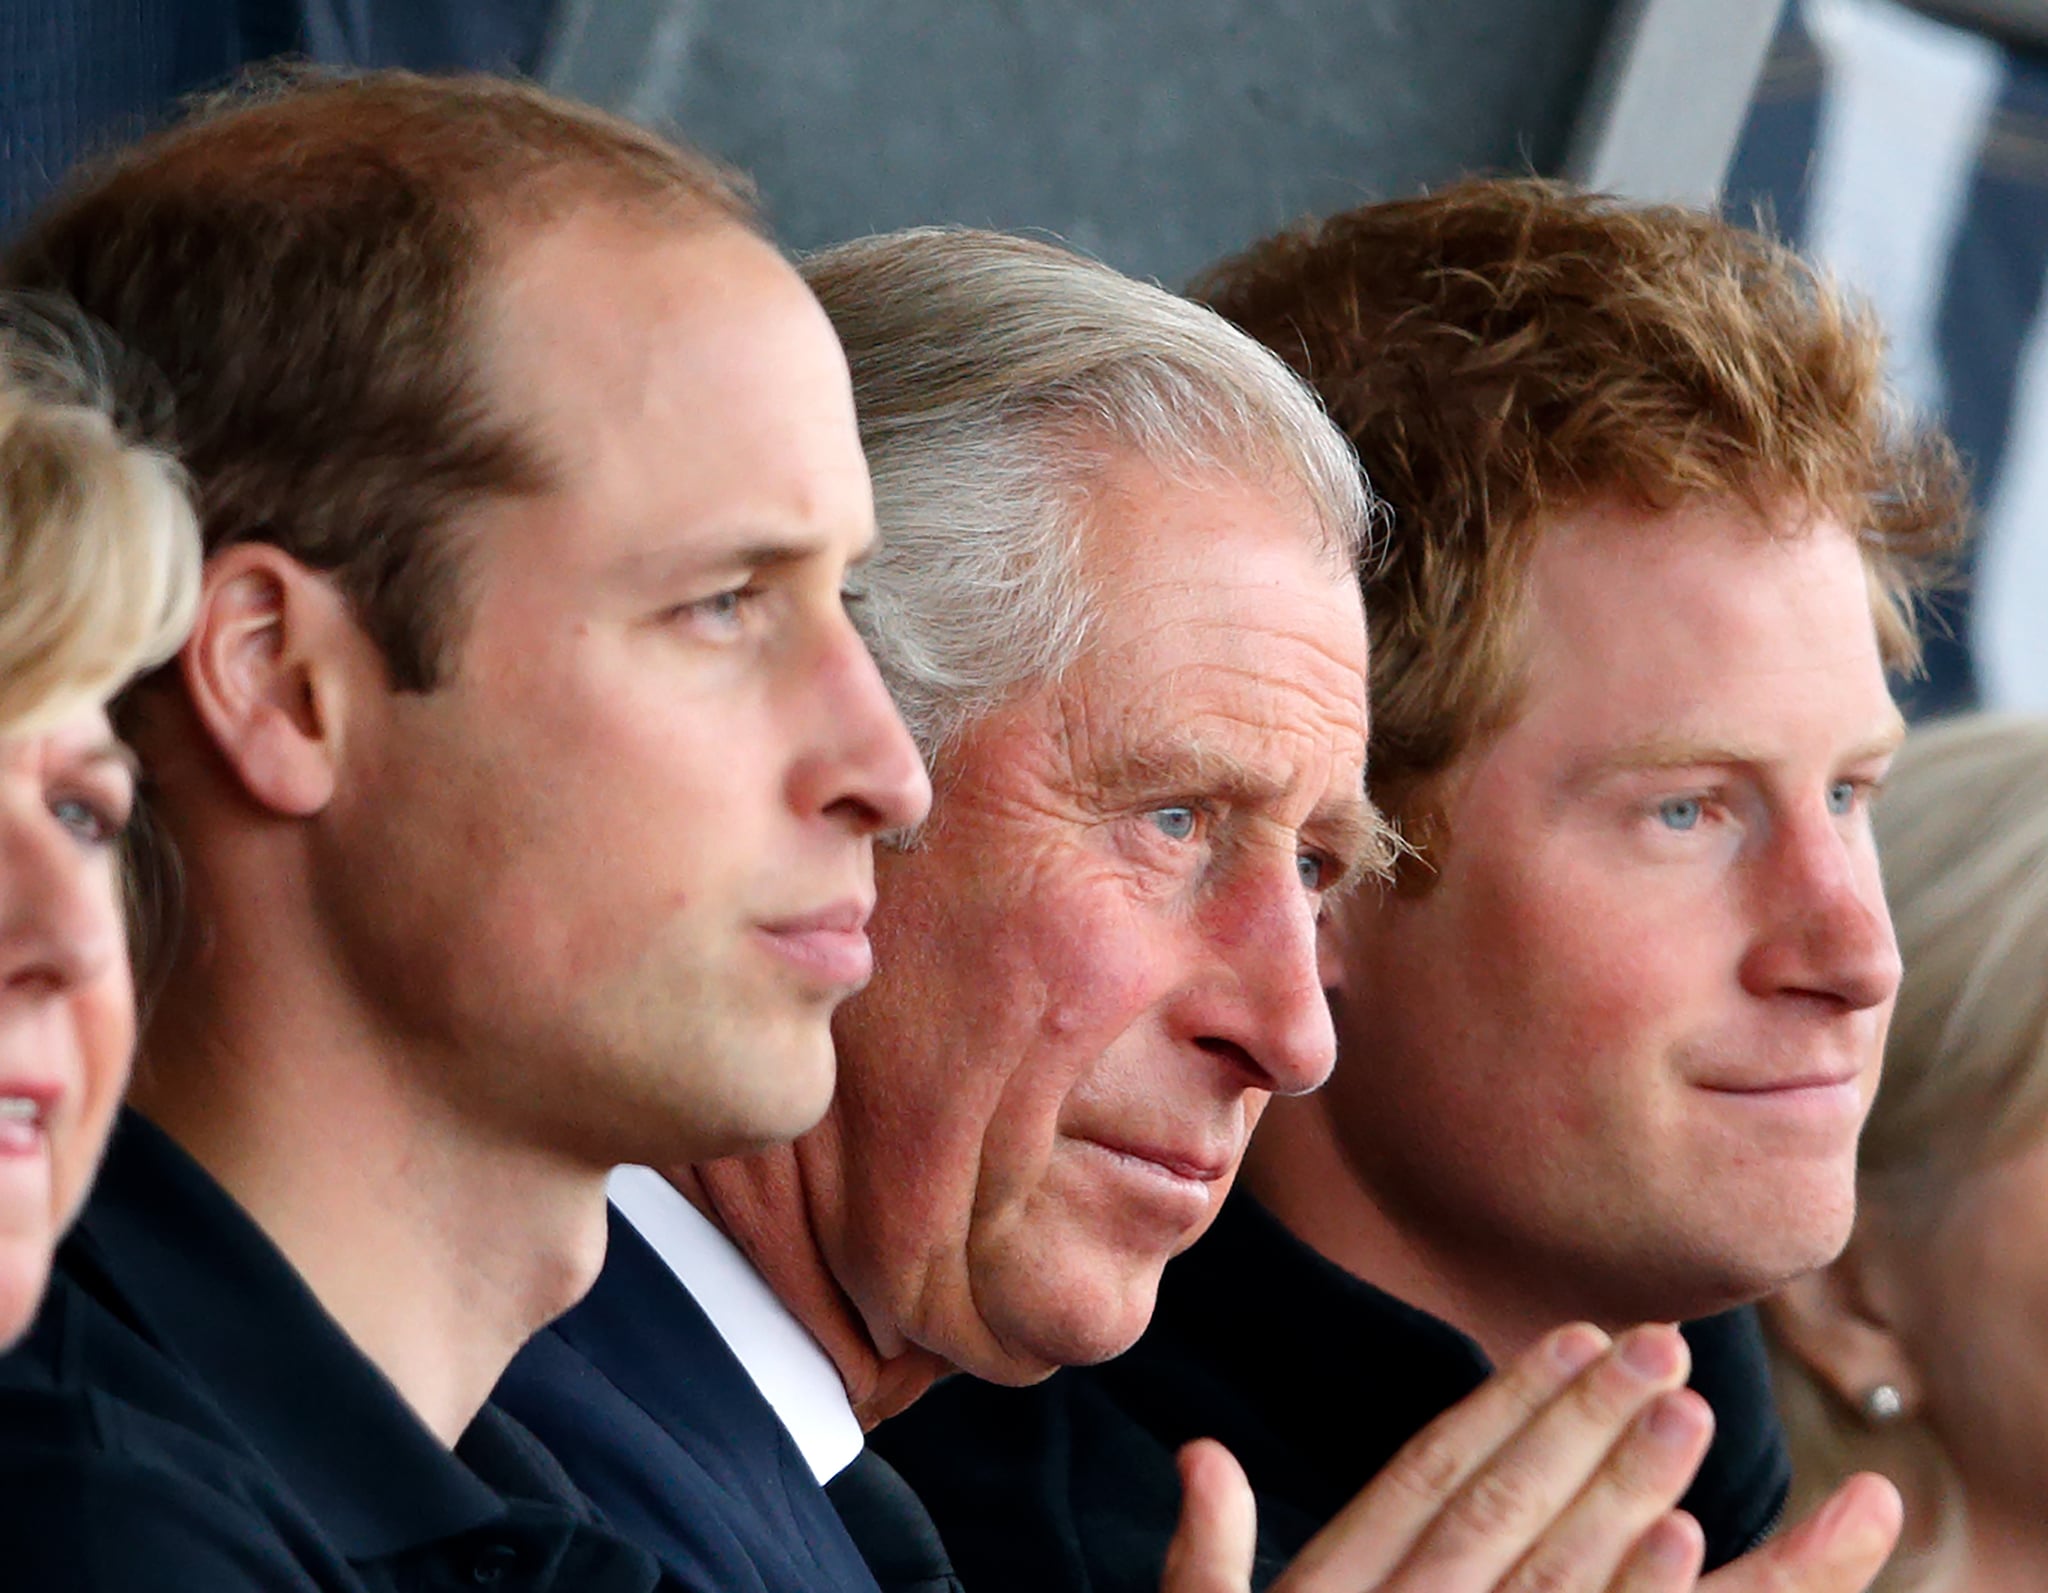 LONDON, UNITED KINGDOM - SEPTEMBER 11: (EMBARGOED FOR PUBLICATION IN UK NEWSPAPERS UNTIL 48 HOURS AFTER CREATE DATE AND TIME) Prince William, Duke of Cambridge, Prince Charles, Prince of Wales & Prince Harry watch the athletics during the Invictus Games at the Lee Valley Athletics Centre on September 11, 2014 in London, England. (Photo by Max Mumby/Indigo/Getty Images)